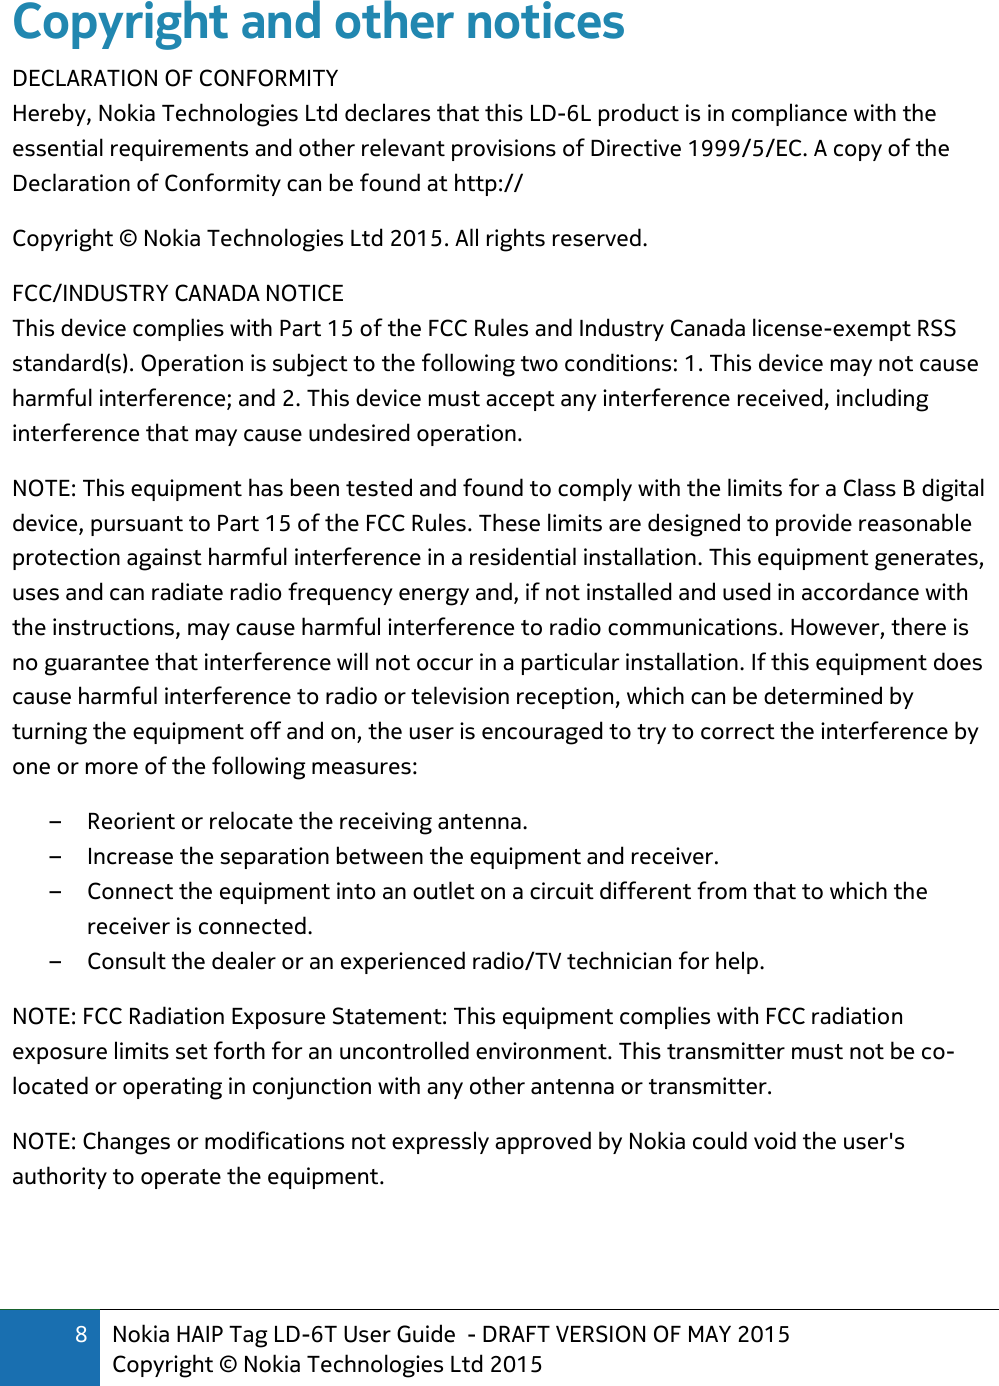 8 Nokia HAIP Tag LD-6T User Guide  - DRAFT VERSION OF MAY 2015 Copyright © Nokia Technologies Ltd 2015  Copyright and other notices DECLARATION OF CONFORMITY Hereby, Nokia Technologies Ltd declares that this LD-6L product is in compliance with the essential requirements and other relevant provisions of Directive 1999/5/EC. A copy of the Declaration of Conformity can be found at http:// Copyright © Nokia Technologies Ltd 2015. All rights reserved. FCC/INDUSTRY CANADA NOTICE This device complies with Part 15 of the FCC Rules and Industry Canada license-exempt RSS standard(s). Operation is subject to the following two conditions: 1. This device may not cause harmful interference; and 2. This device must accept any interference received, including interference that may cause undesired operation.  NOTE: This equipment has been tested and found to comply with the limits for a Class B digital device, pursuant to Part 15 of the FCC Rules. These limits are designed to provide reasonable protection against harmful interference in a residential installation. This equipment generates, uses and can radiate radio frequency energy and, if not installed and used in accordance with the instructions, may cause harmful interference to radio communications. However, there is no guarantee that interference will not occur in a particular installation. If this equipment does cause harmful interference to radio or television reception, which can be determined by turning the equipment off and on, the user is encouraged to try to correct the interference by one or more of the following measures:  – Reorient or relocate the receiving antenna.  – Increase the separation between the equipment and receiver.  – Connect the equipment into an outlet on a circuit different from that to which the receiver is connected.  – Consult the dealer or an experienced radio/TV technician for help.  NOTE: FCC Radiation Exposure Statement: This equipment complies with FCC radiation exposure limits set forth for an uncontrolled environment. This transmitter must not be co-located or operating in conjunction with any other antenna or transmitter.  NOTE: Changes or modifications not expressly approved by Nokia could void the user&apos;s authority to operate the equipment. 